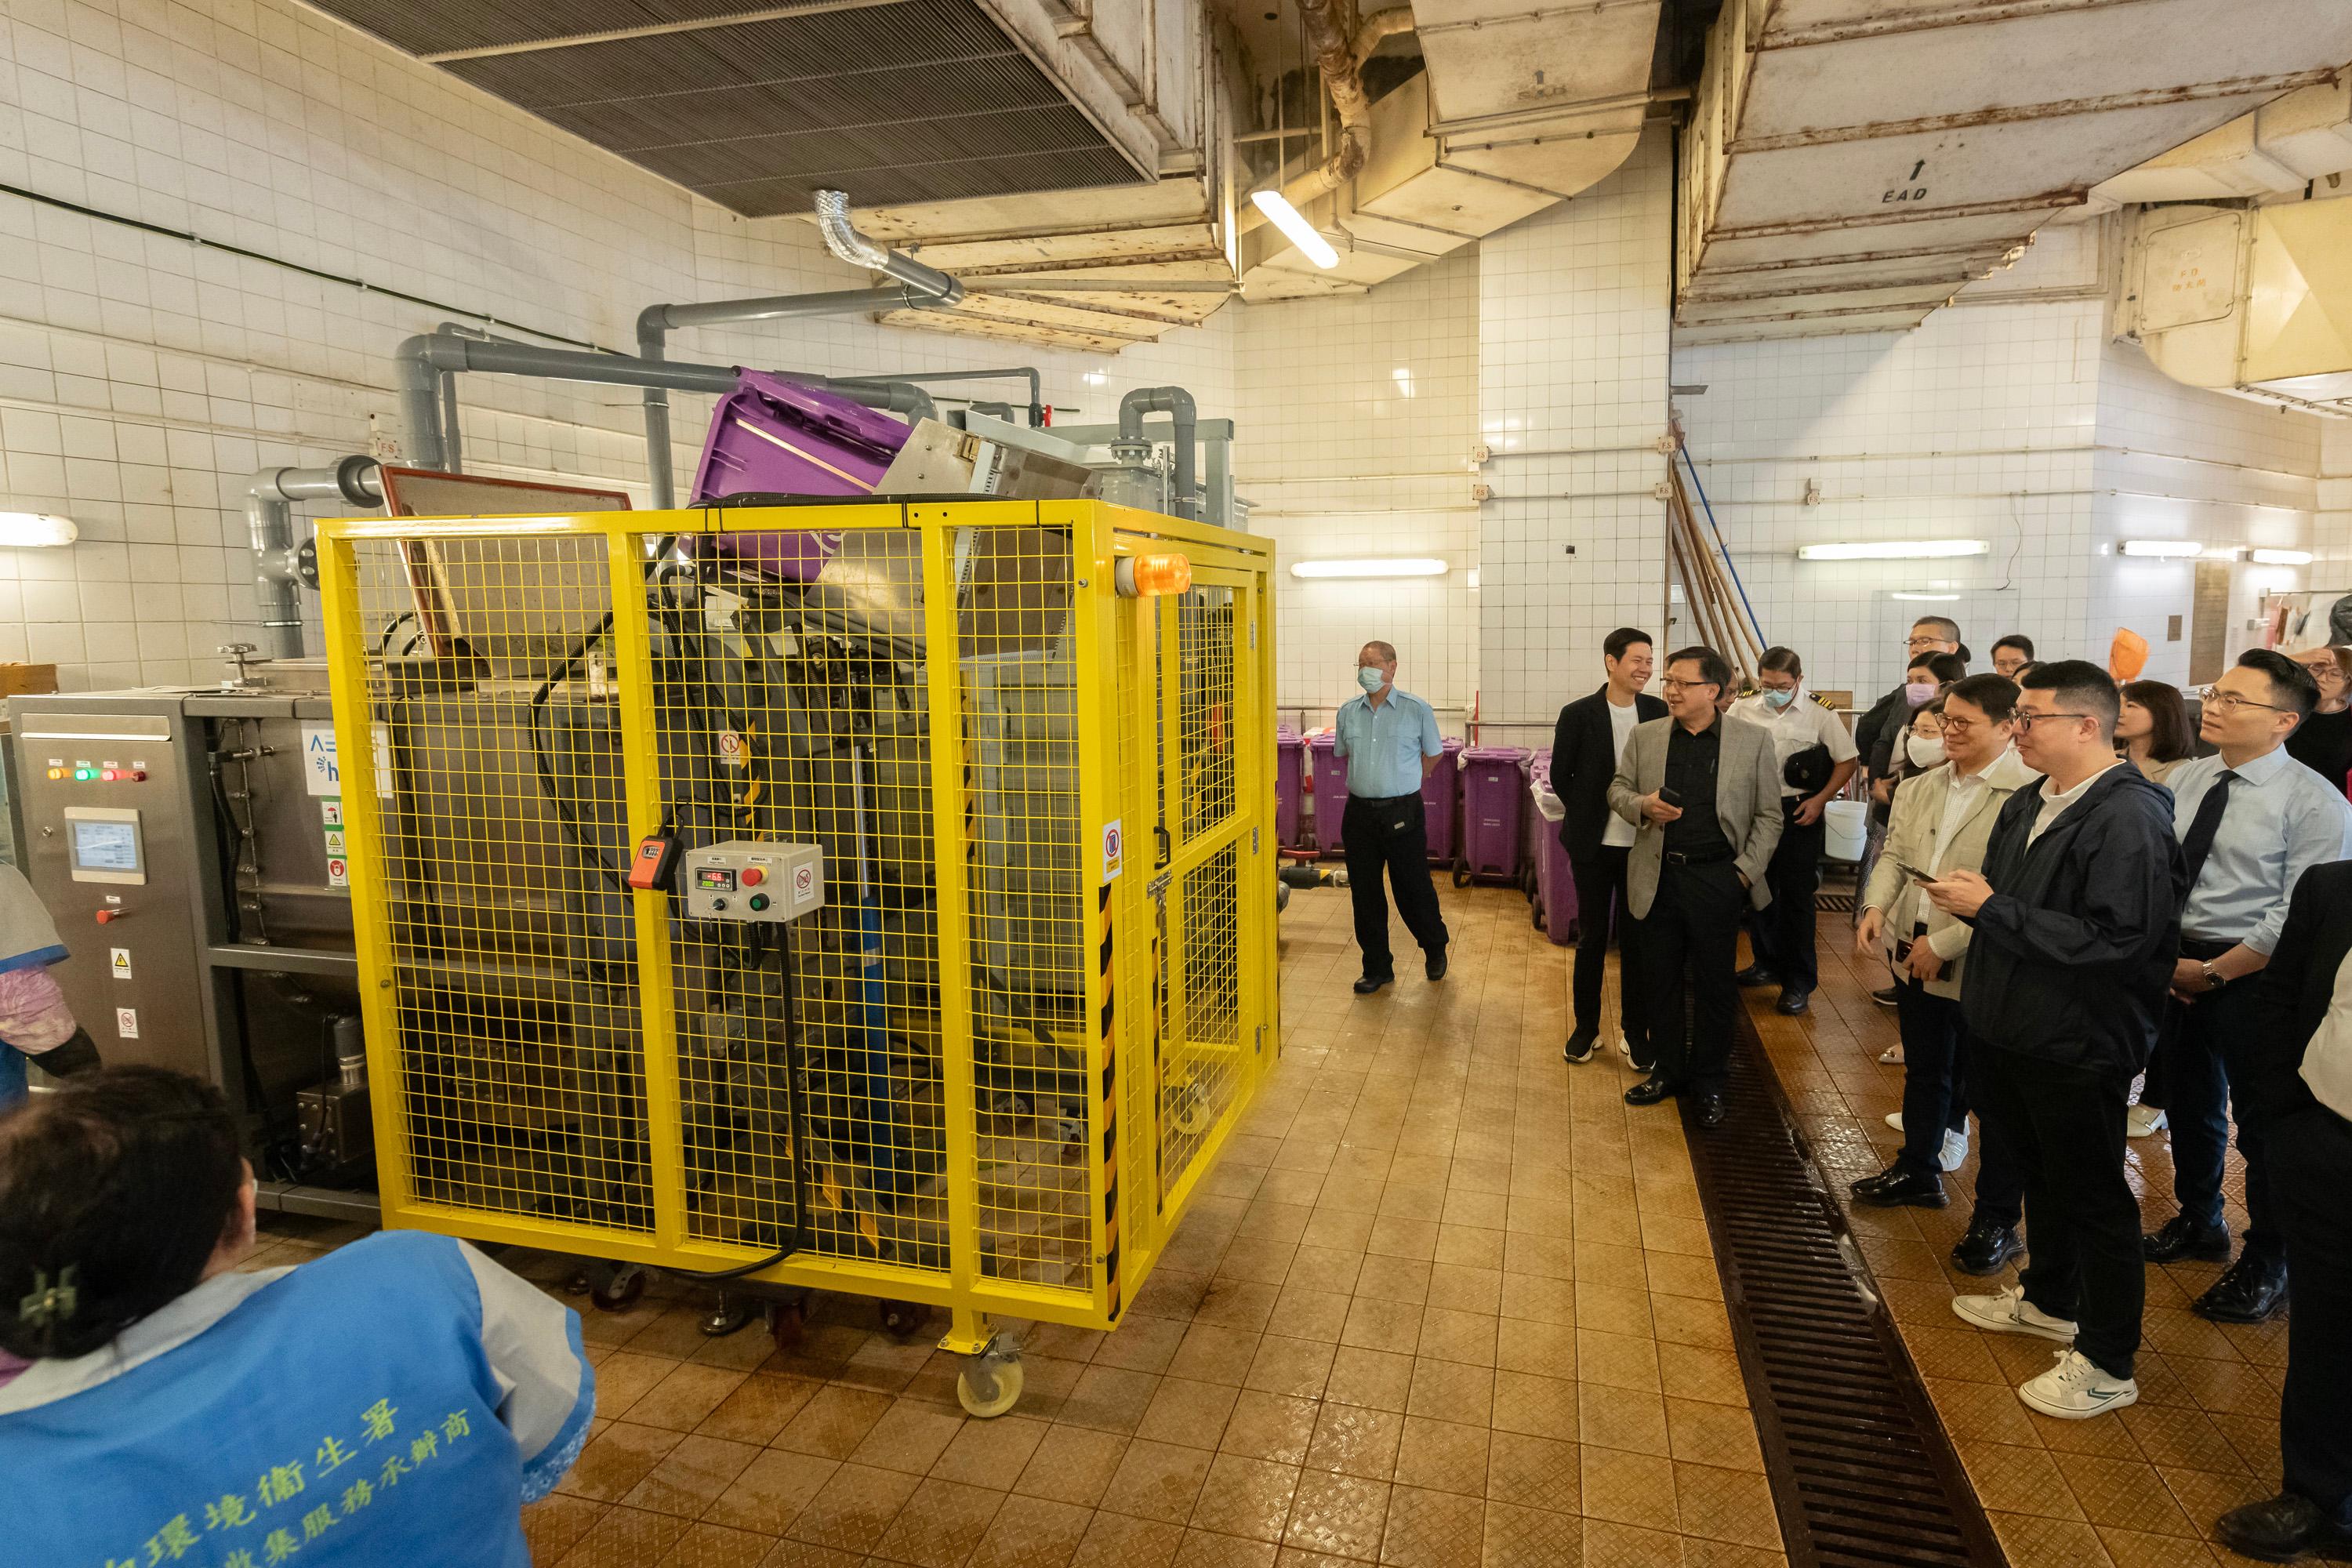 The Legislative Council Panel on Environmental Affairs visited two food waste treatment facilities today (May 20). Photo shows Members observing the food waste pre-treatment system "Food TranSmarter" at Tai Po Hui Market.
